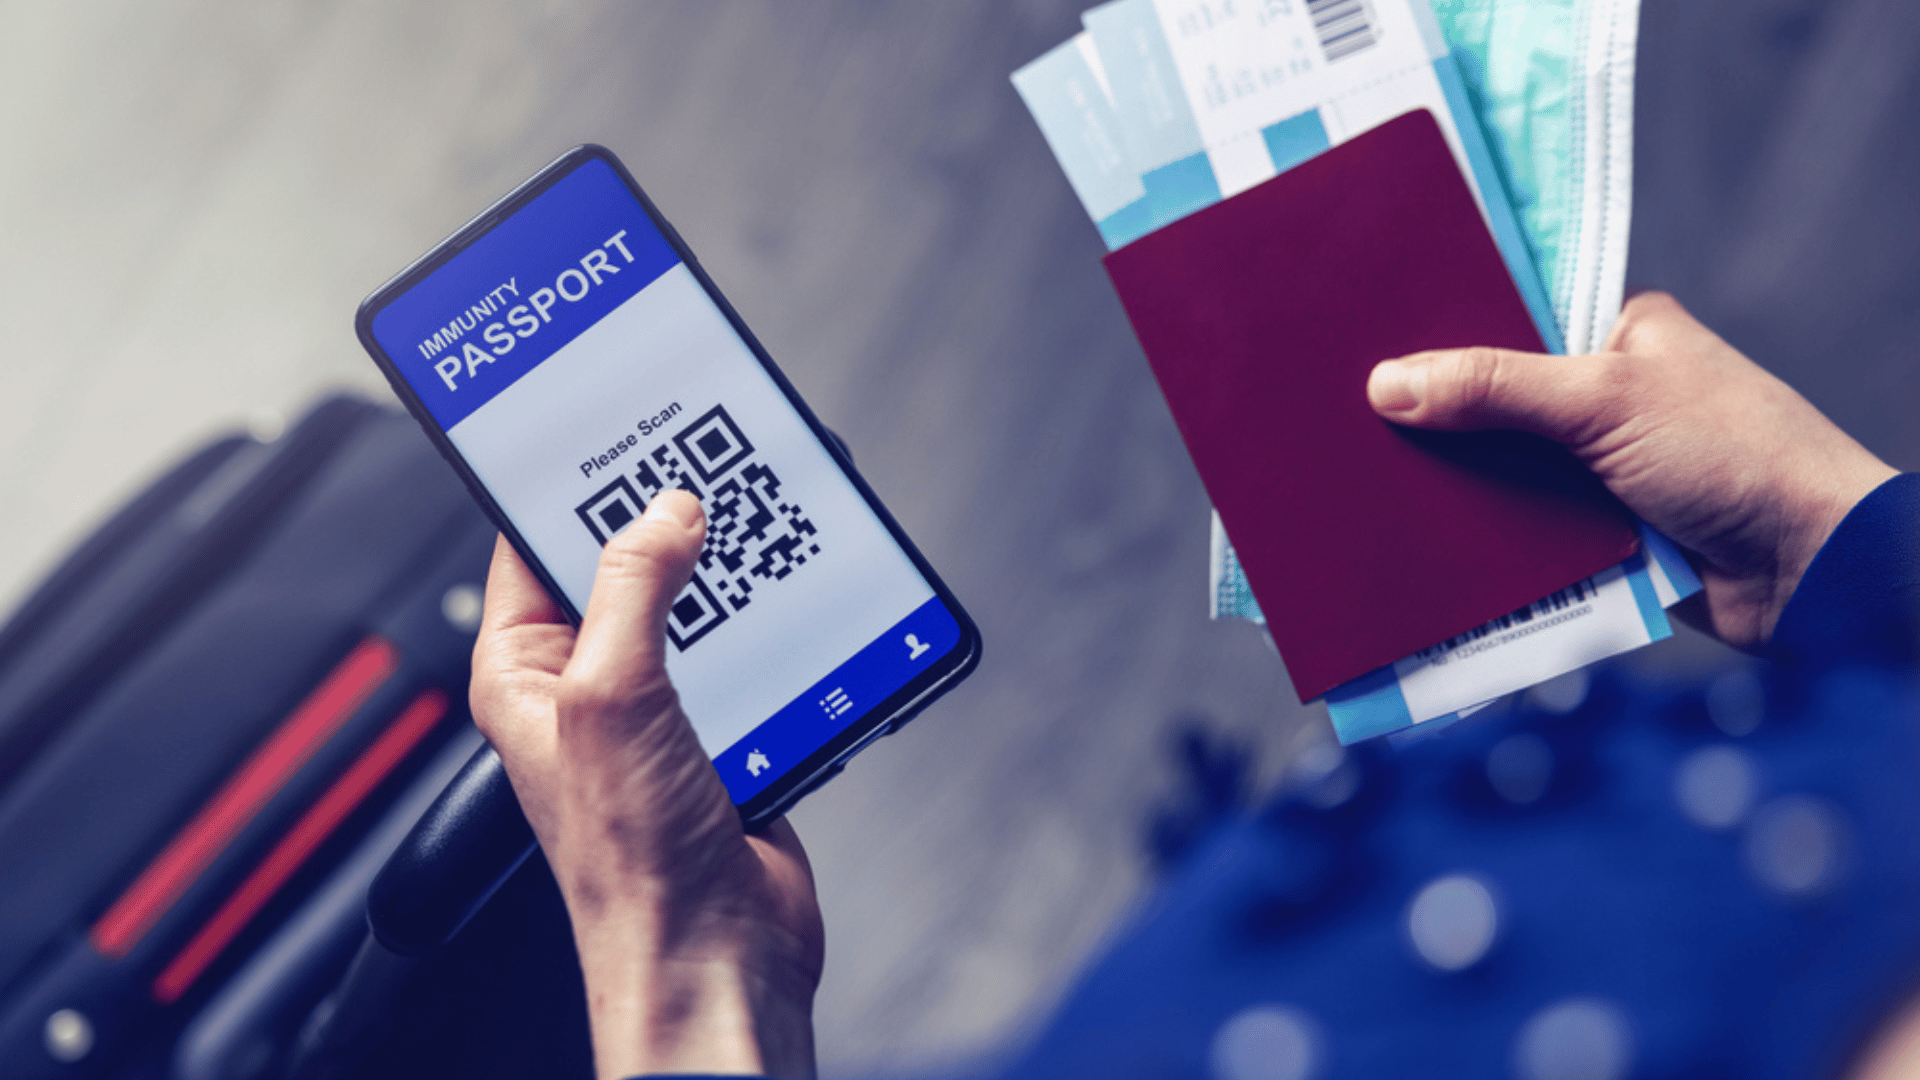 Finland Becomes First Country To Test Digital Passports